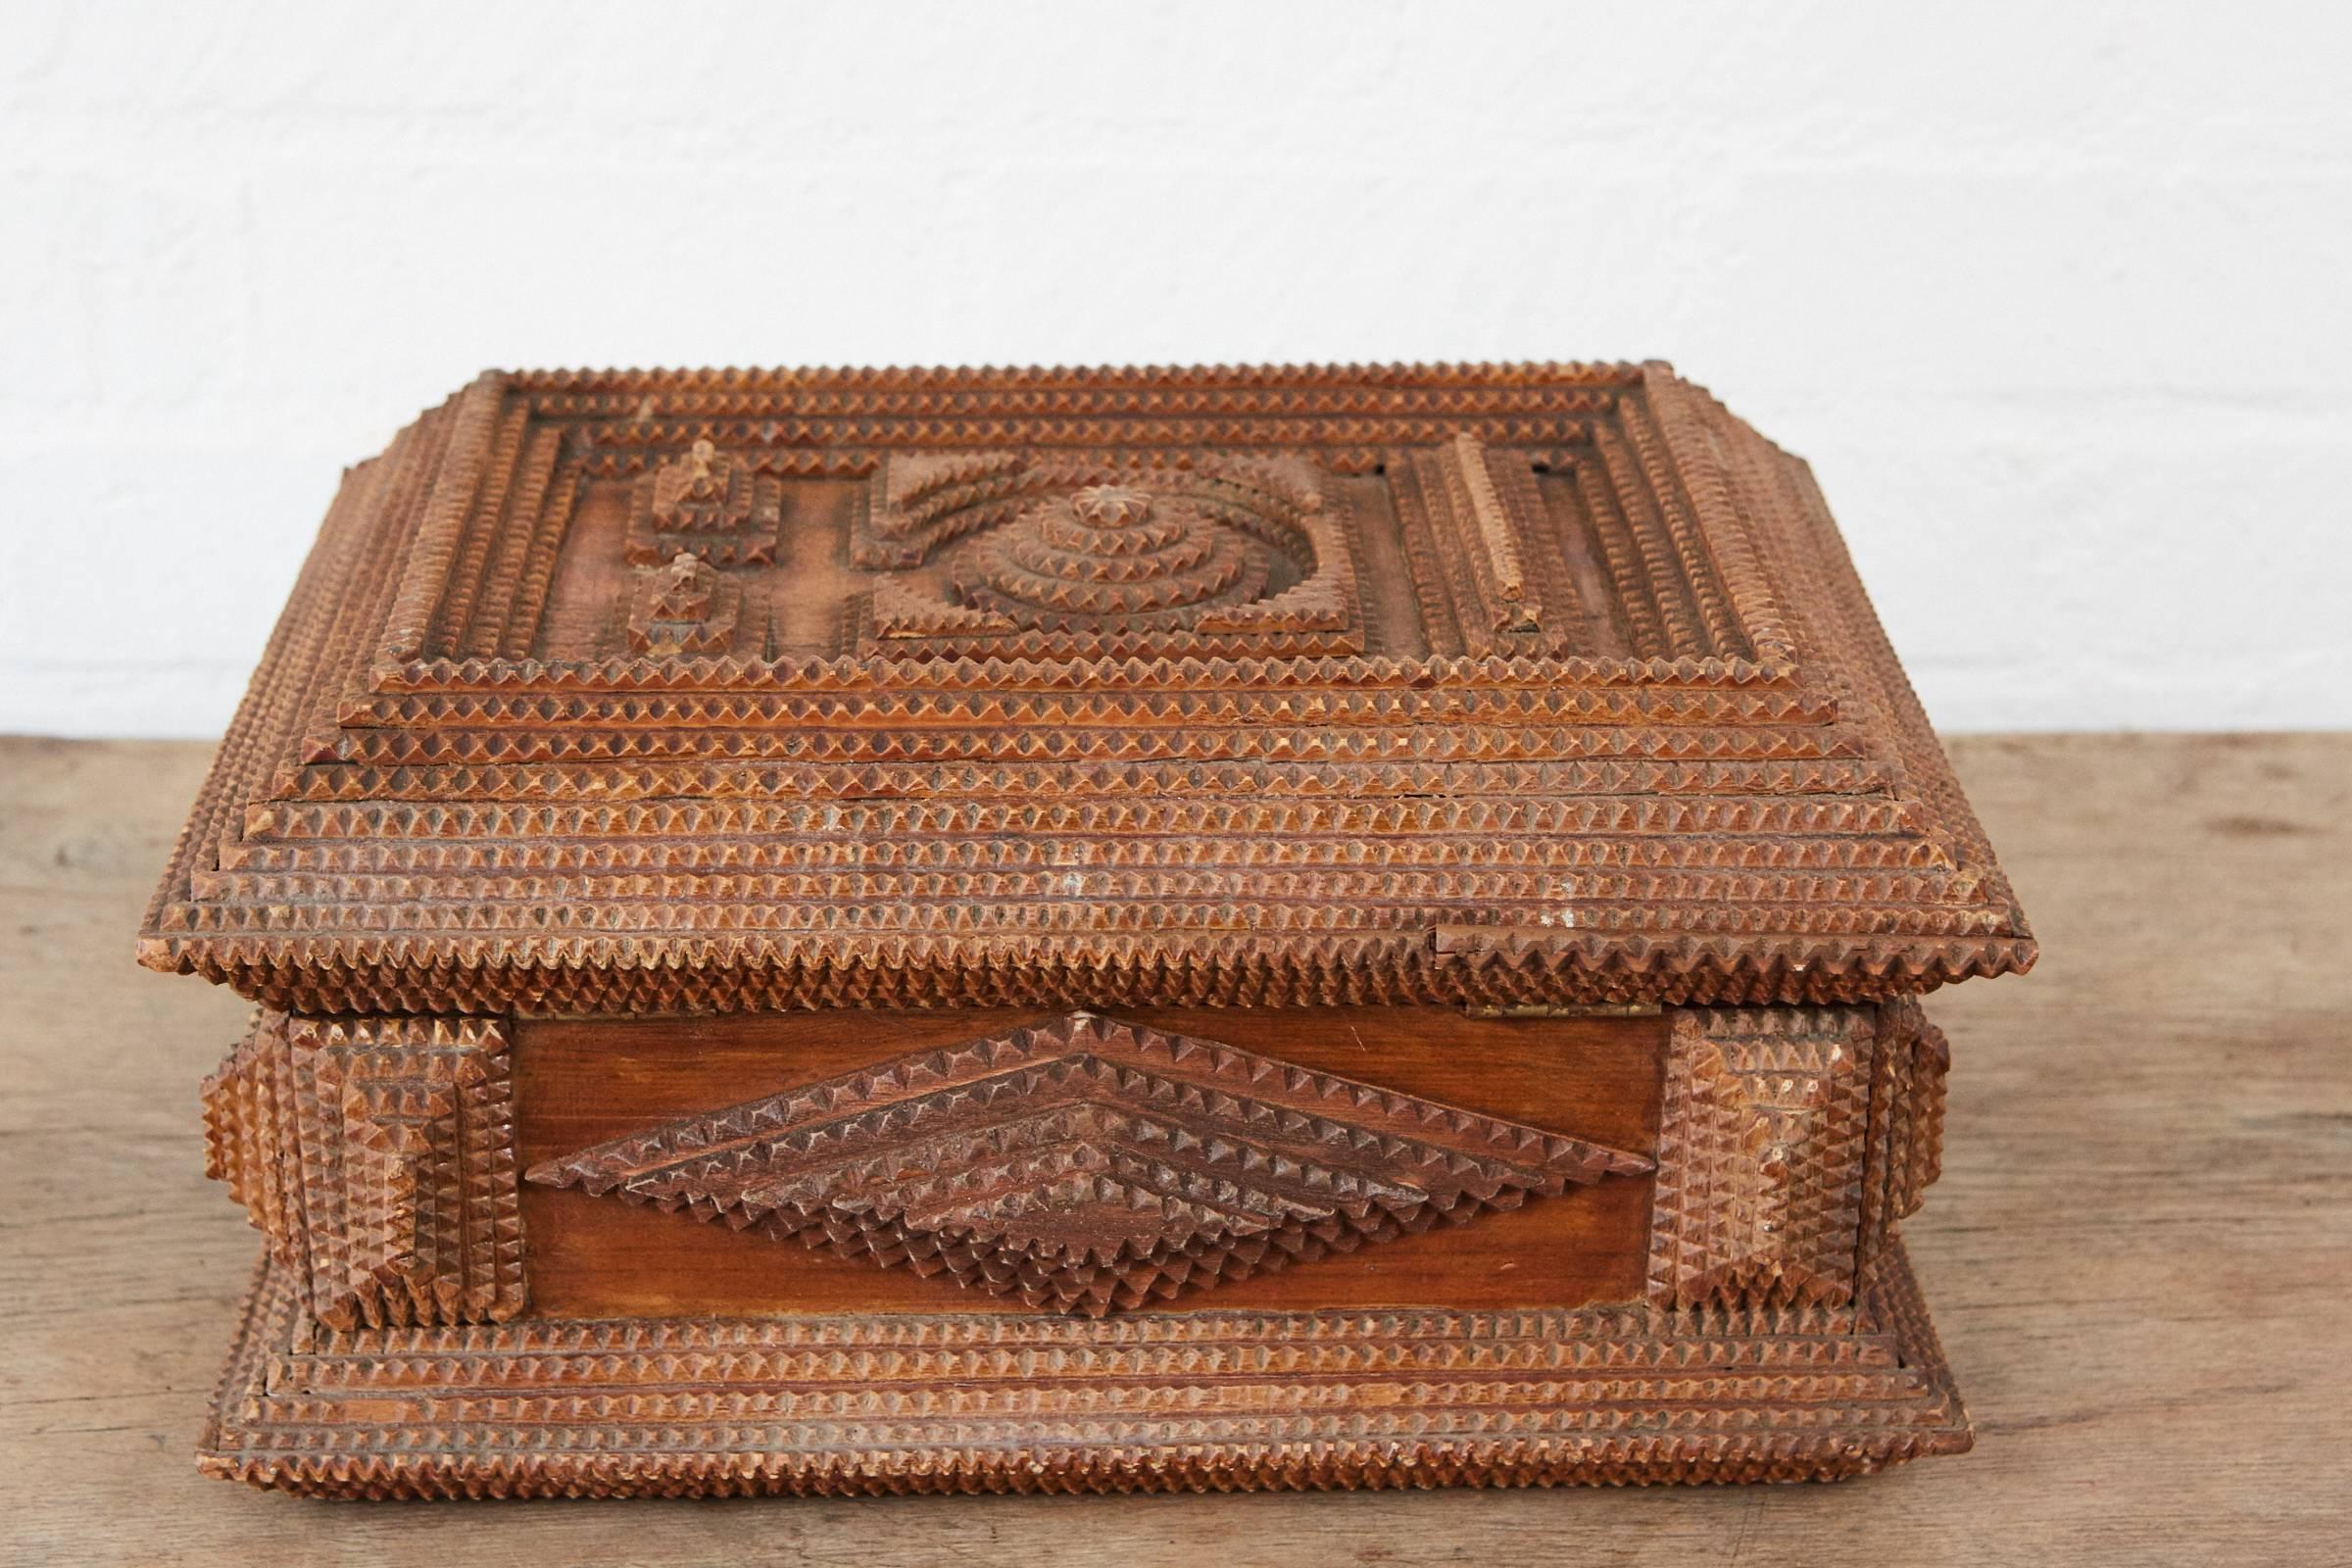 This interesting tramp art box is of a nice size with multiple geometric layers in various designs made of hand cut cigar box wood. The interior is lined with hand printed Japanese paper.
     
     